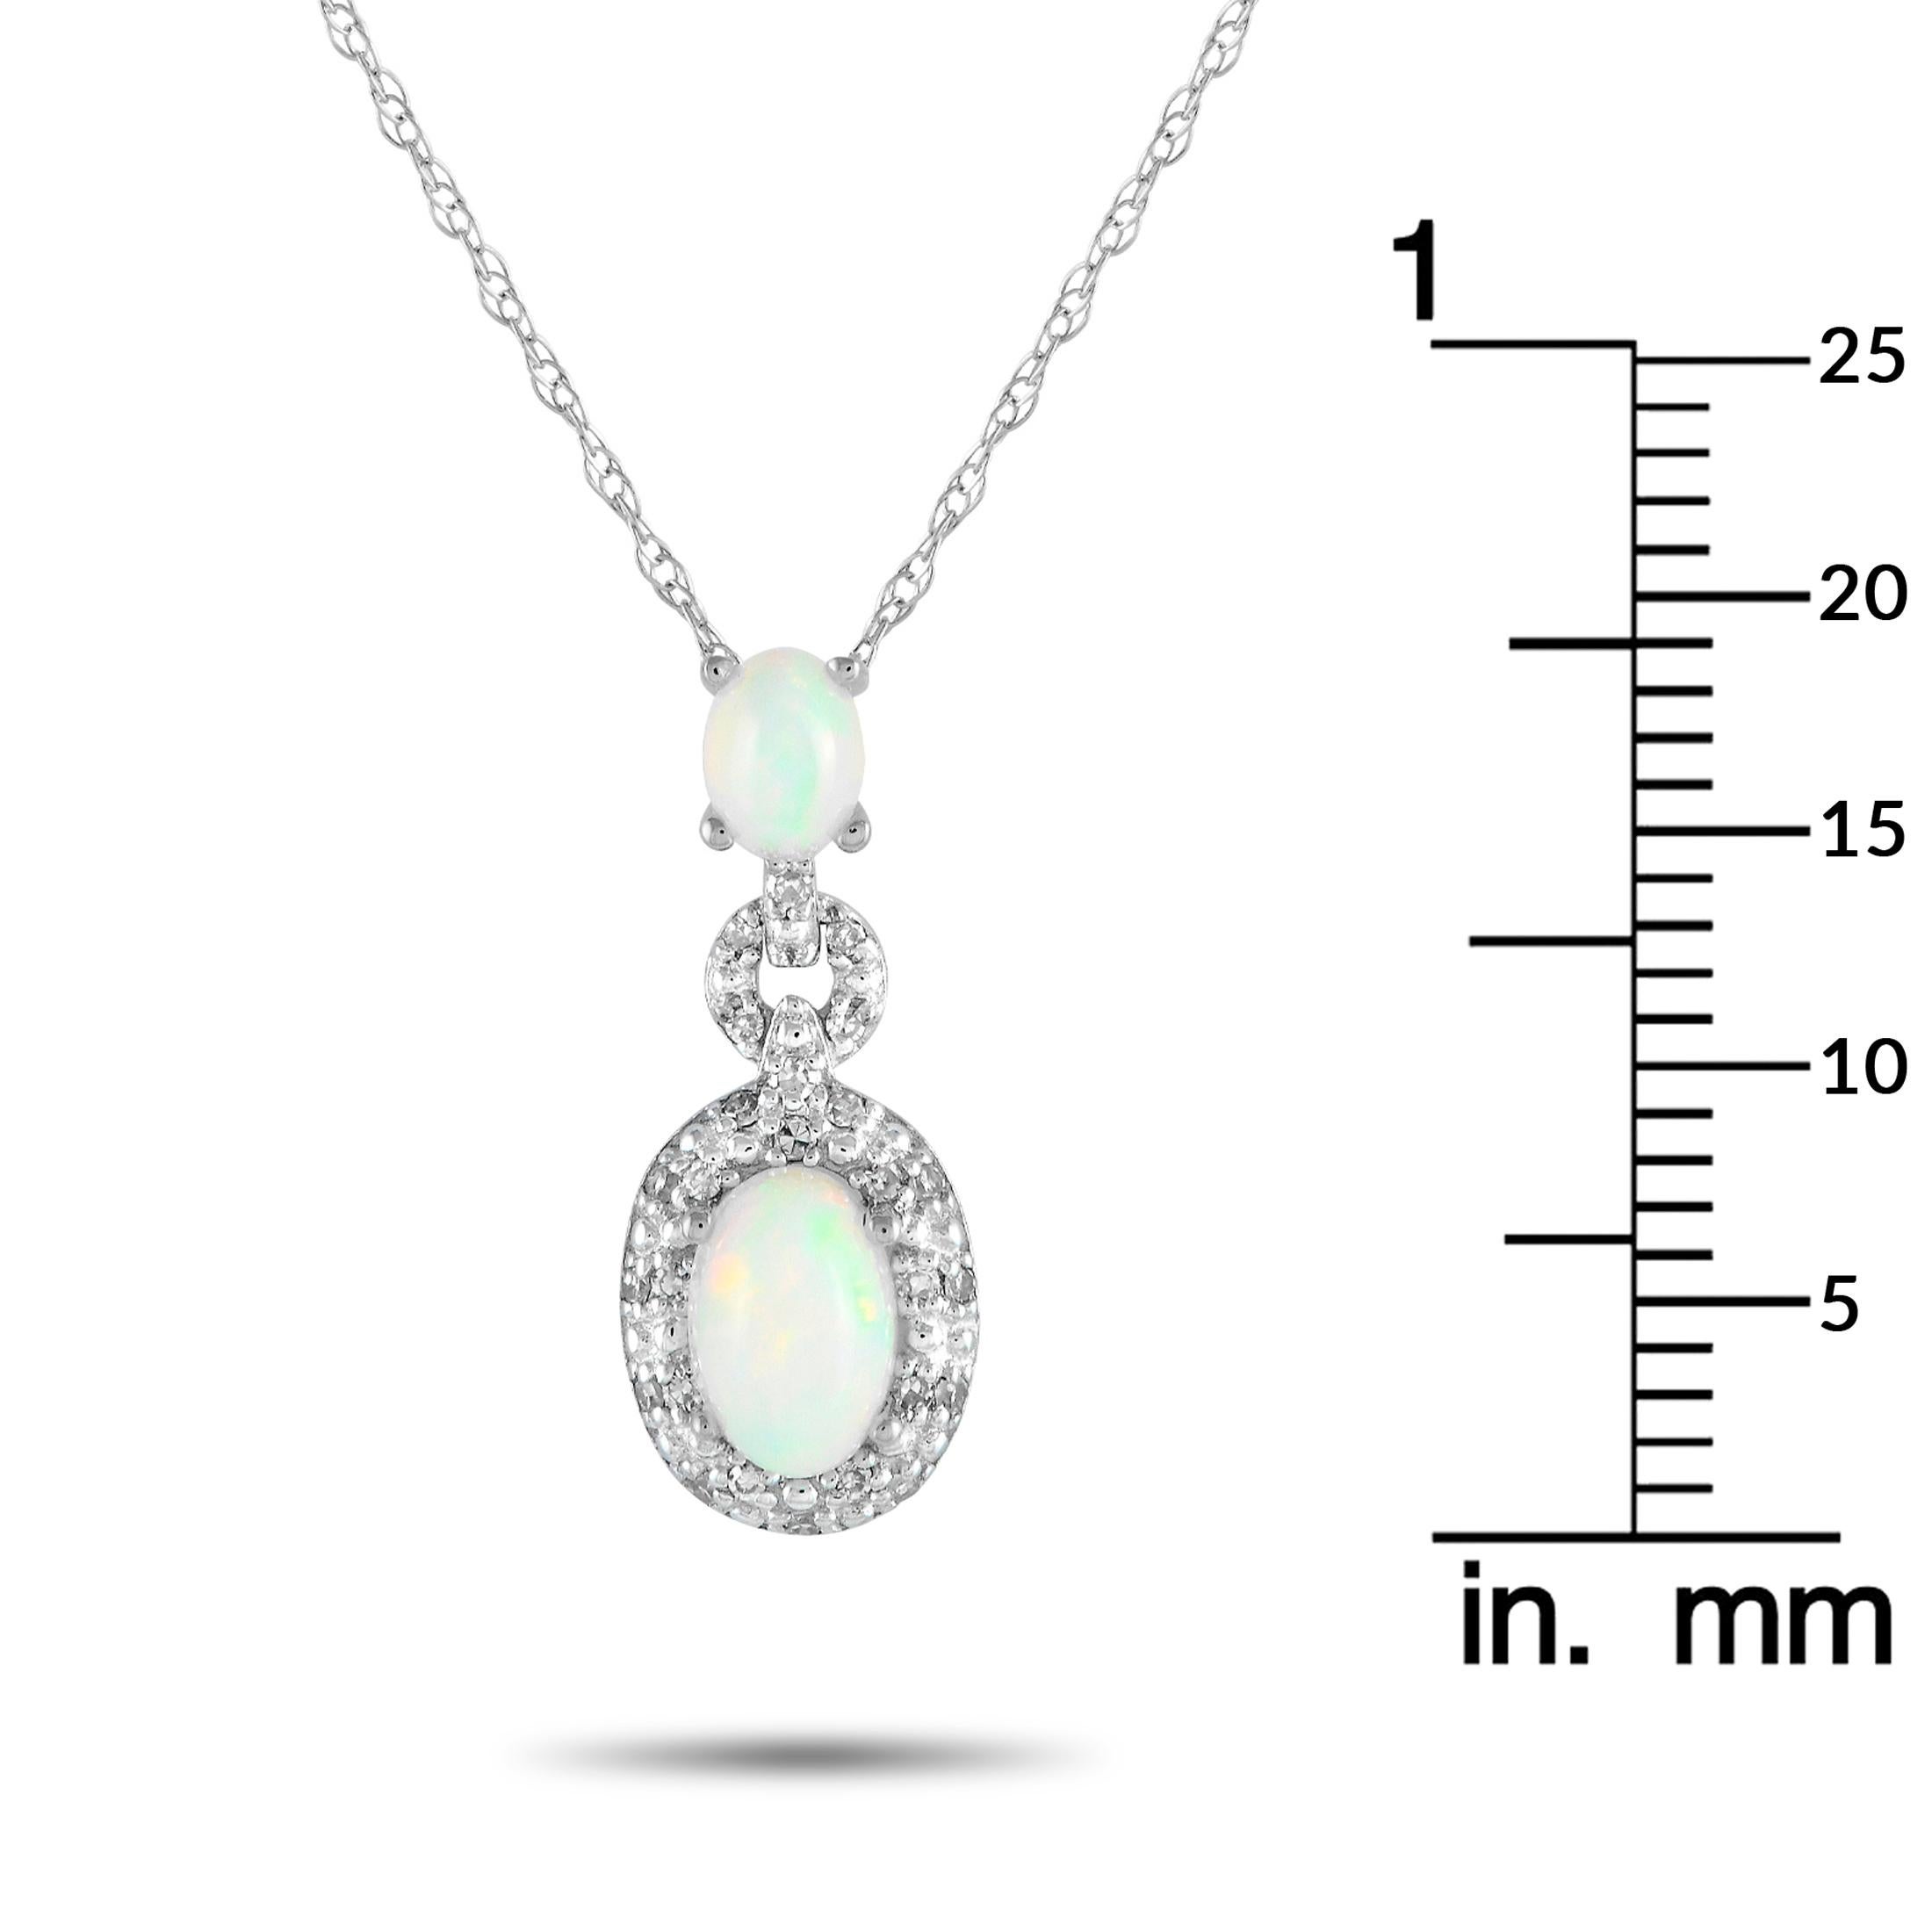 LB Exclusive 14K White Gold 0.08ct Diamond & Opal Pendant Necklace PD4-16183WOP In New Condition For Sale In Southampton, PA